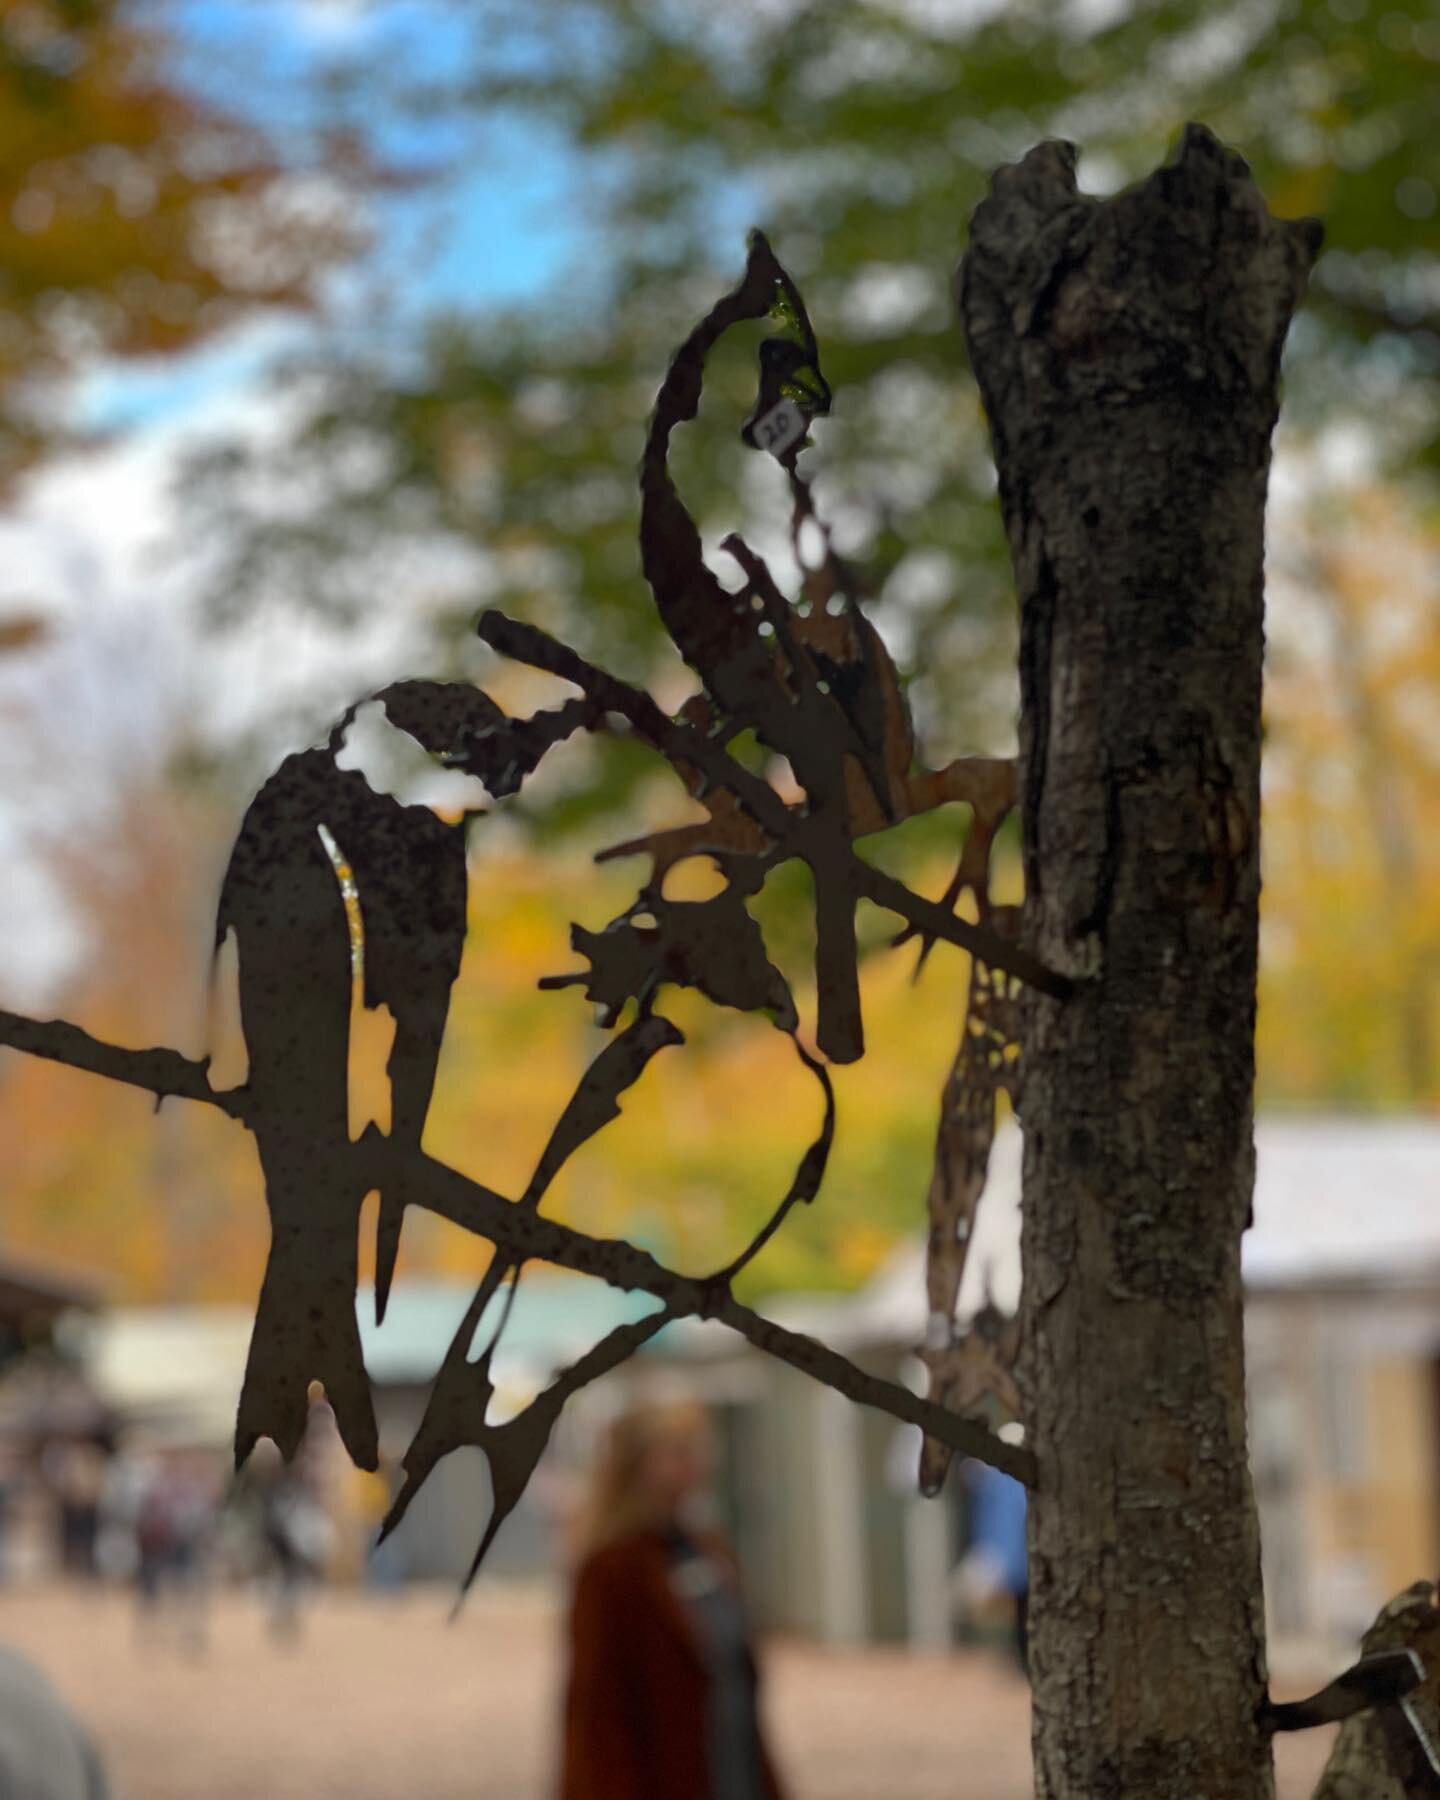 Special thanks to all who made this our best year yet at Christmas in the Woods! We ended on a glorious day. Blessings to all for this amazing opportunity. #metal #metalart #customart #christmas #gardenart #animalart